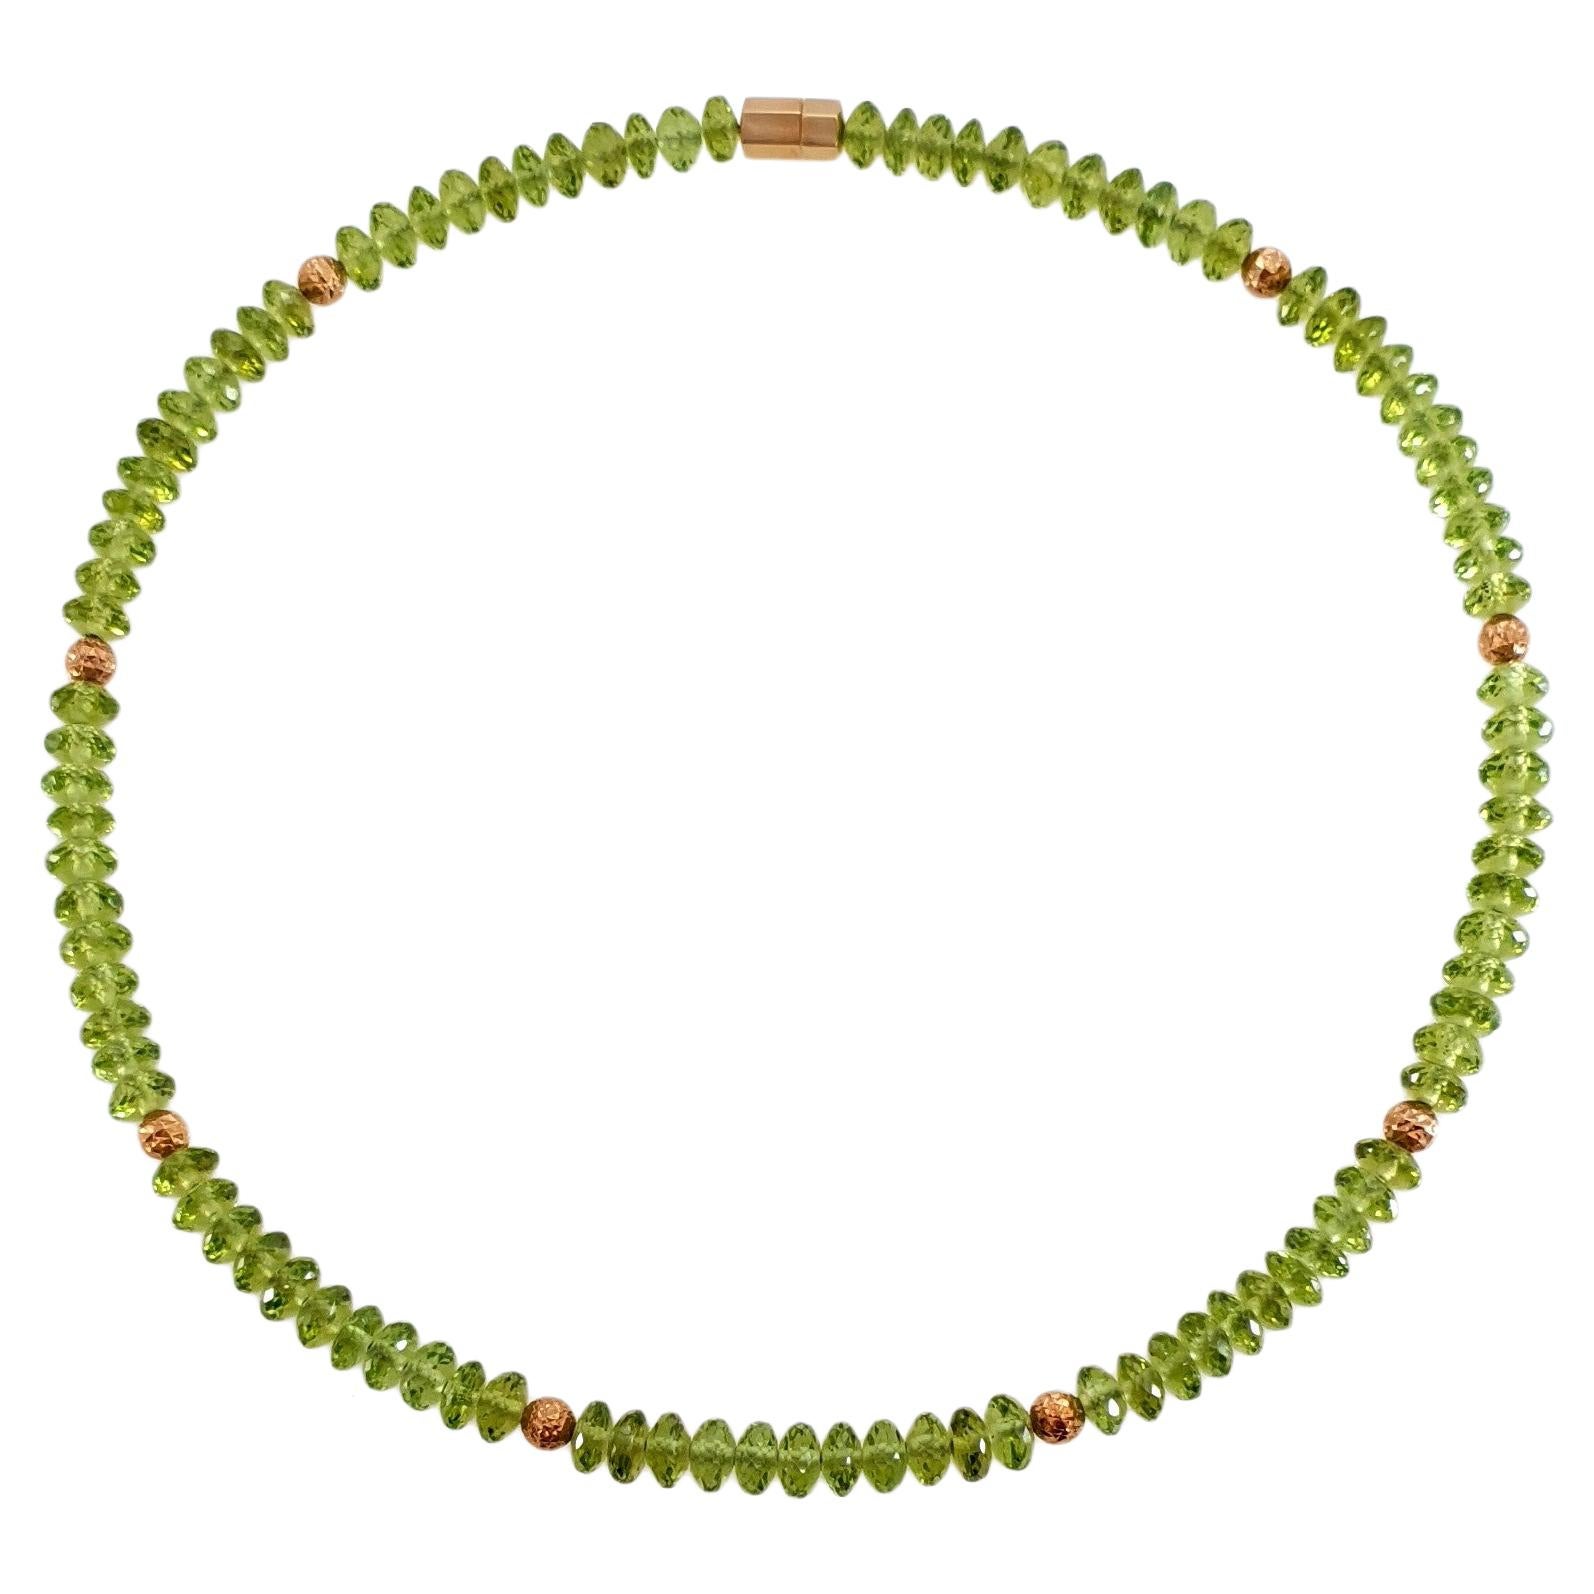 Faceted Green Peridot Rondel Beaded Necklace with 18 Carat Rose Gold For Sale 1